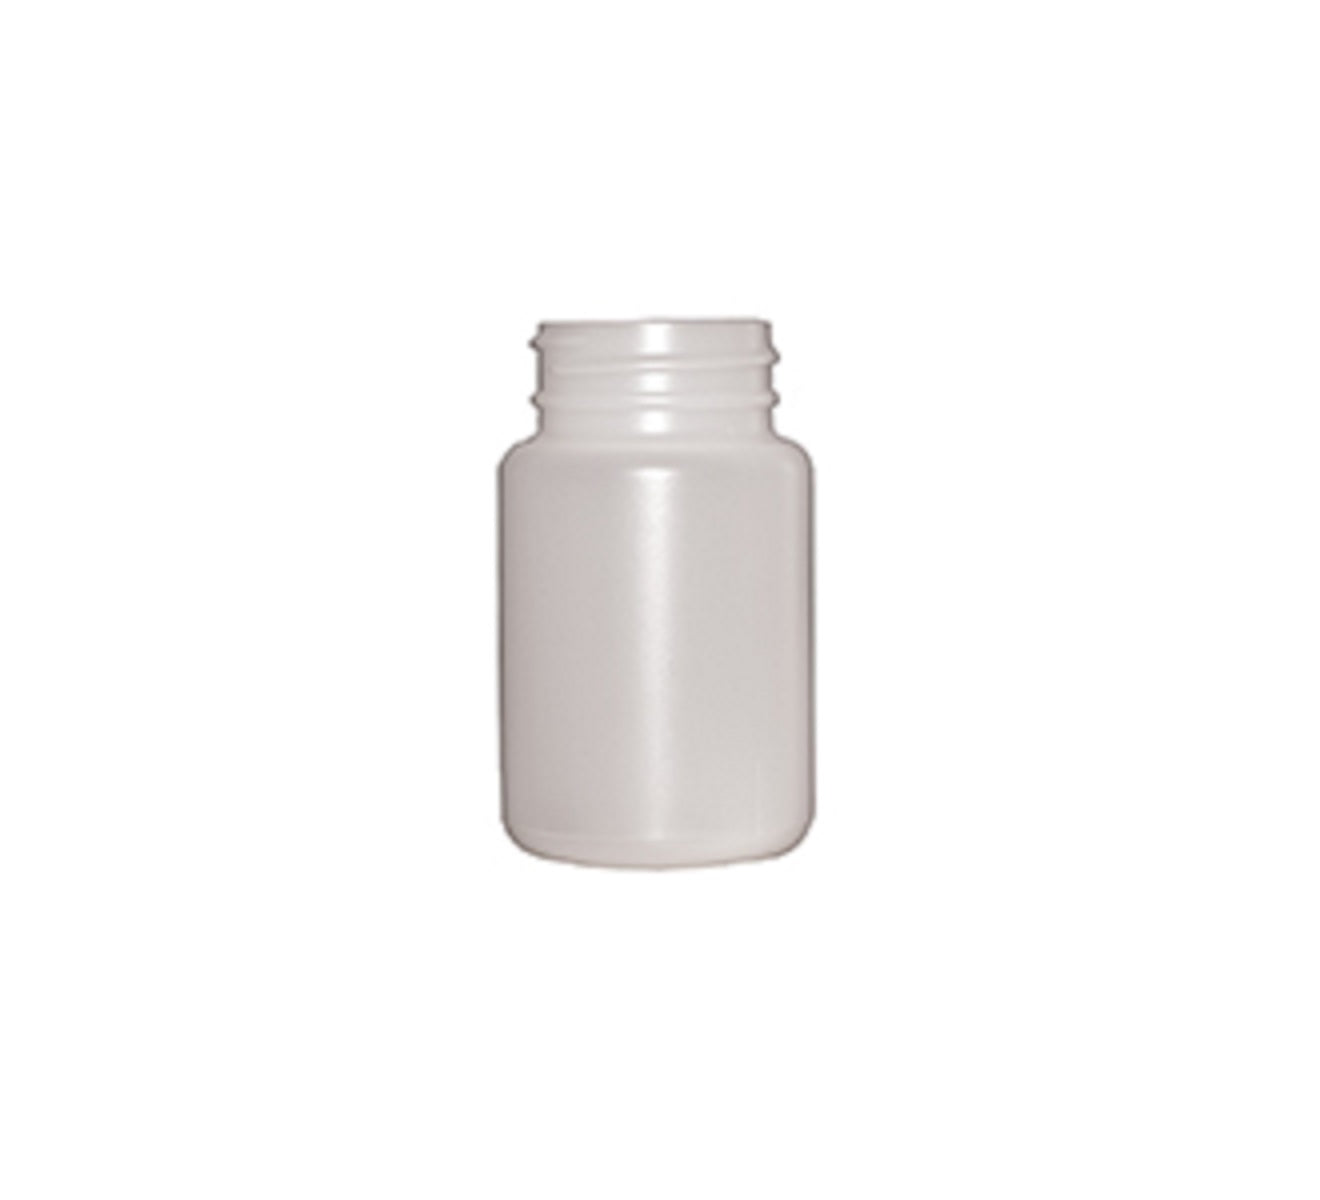 bigceramicstore-com,Replacement 3 oz Plastic Bottle for Paasche 62, VL and H,Paasche,Tools - Airbrushes